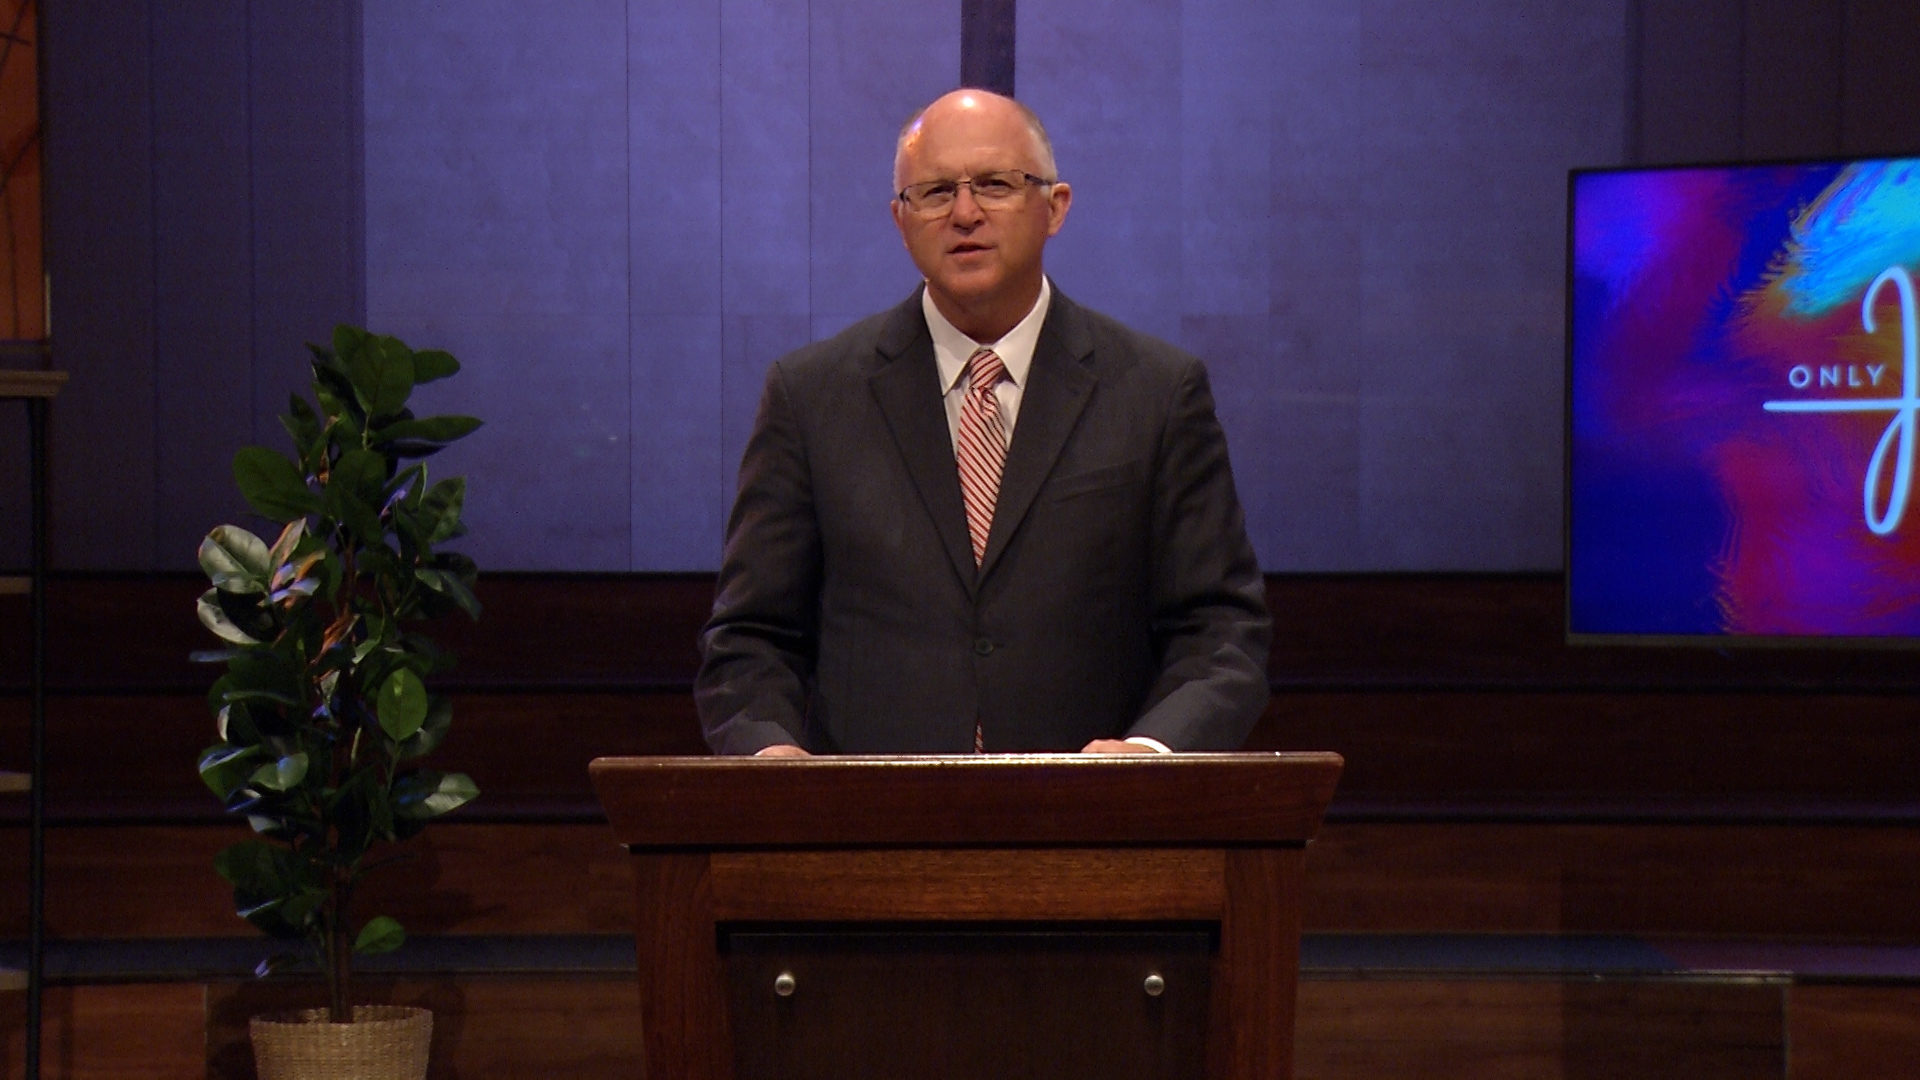 Pastor Paul Chappell: Only Jesus Brings Contentment